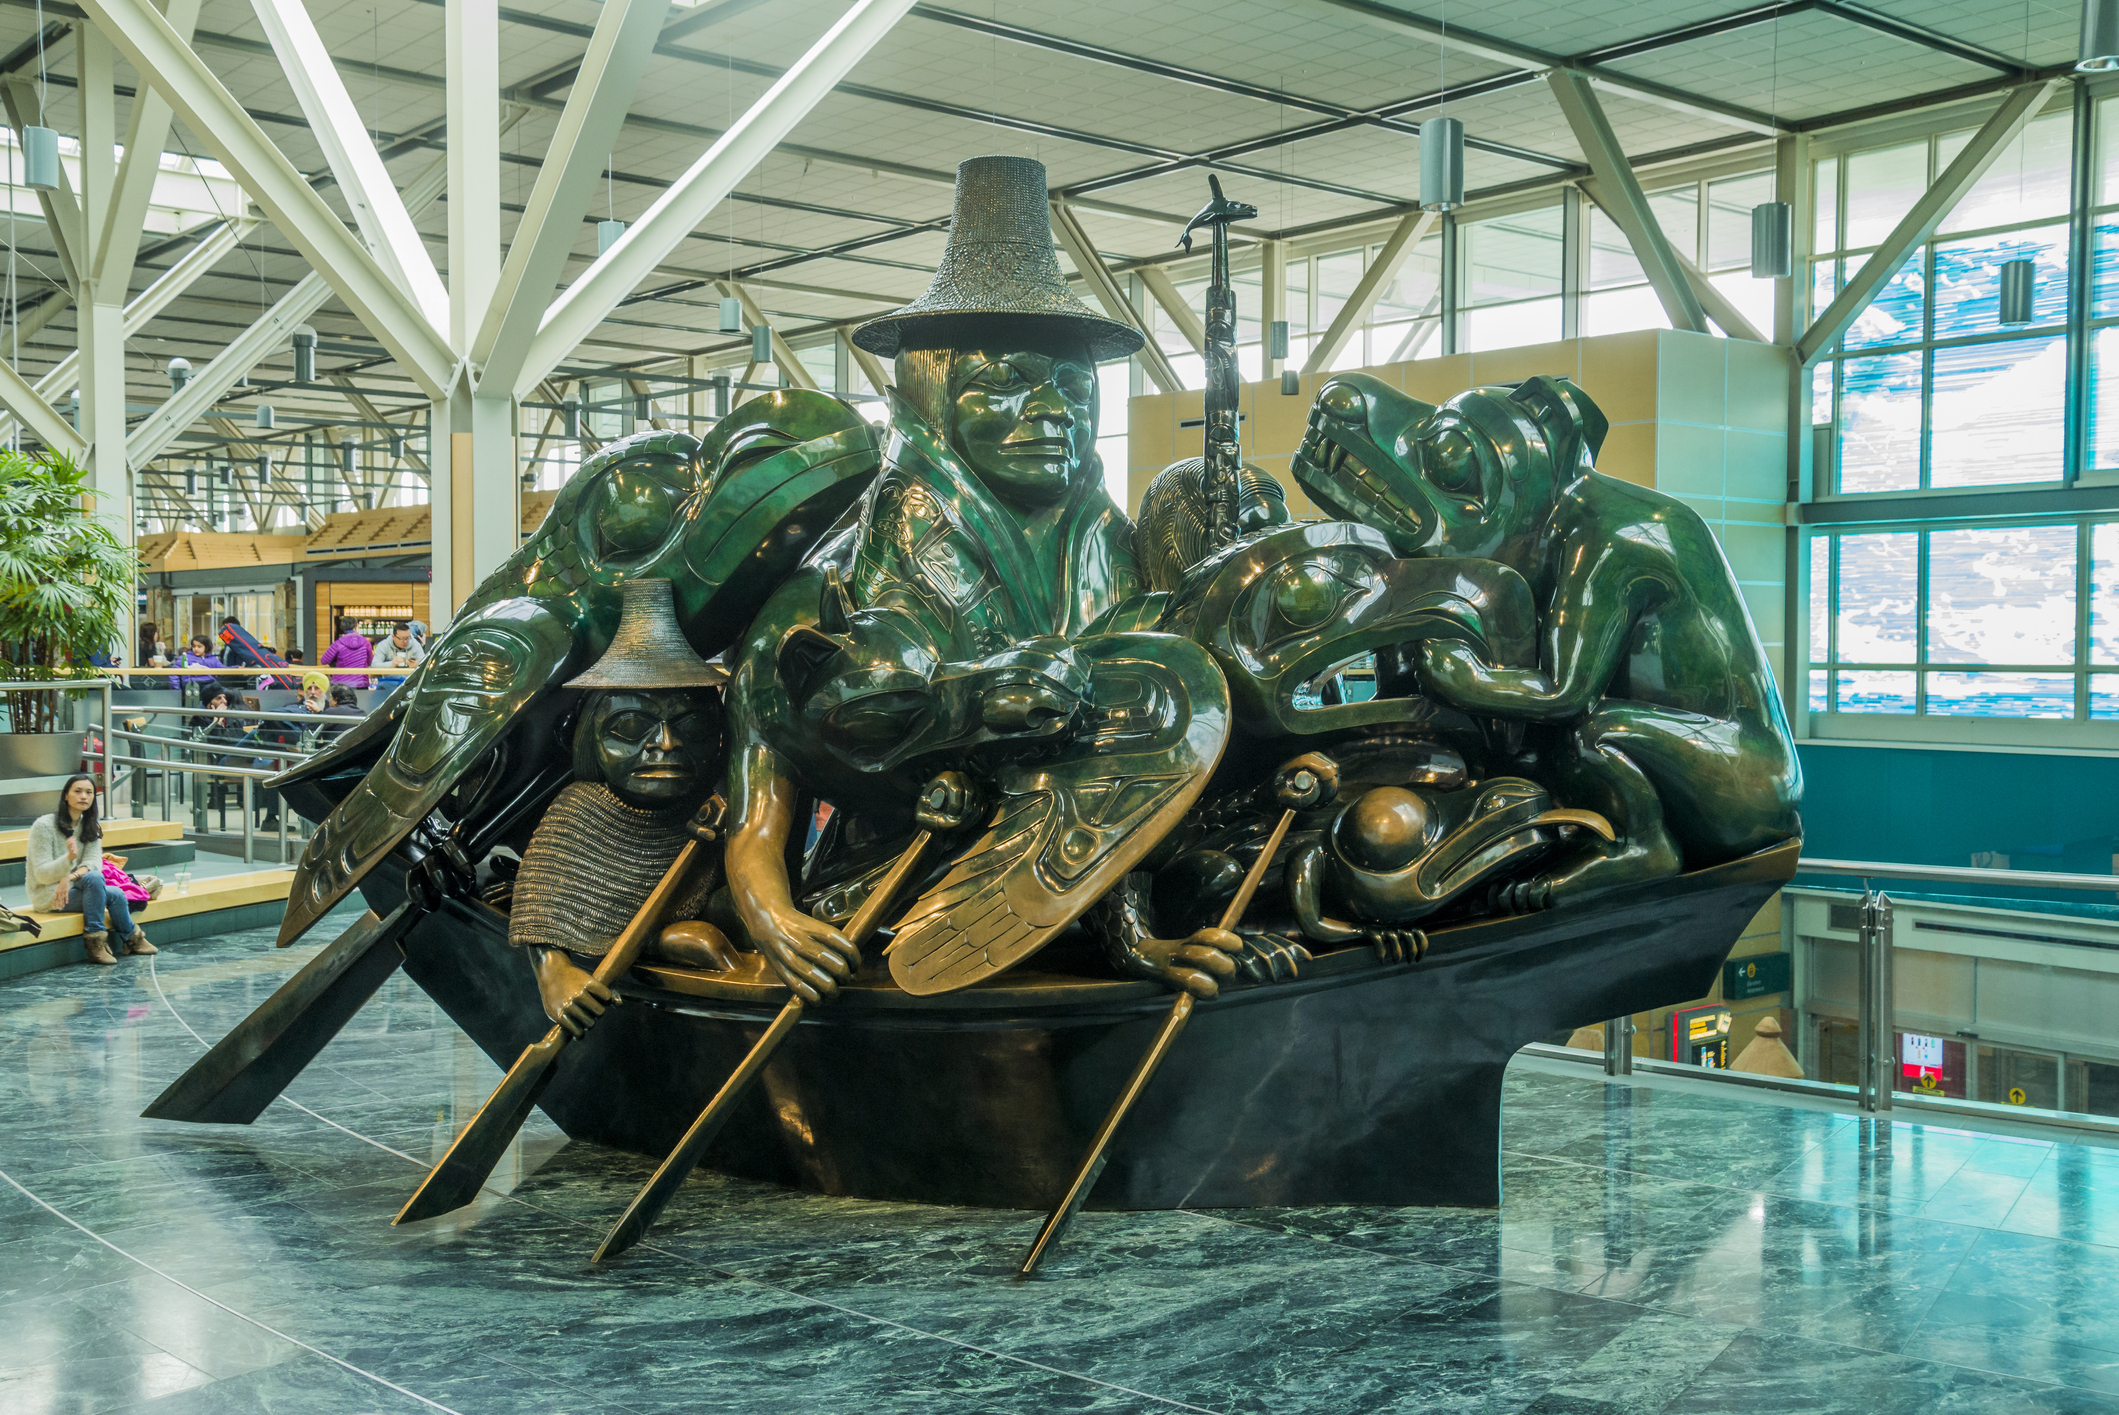 Cast bronze sculpture, The Spirit of Haida Gwaii, the Jade Canoe, by artist Bill Reid in the Vancouver International Airport. (Michael Wheatley—Getty Images/All Canada Photos)